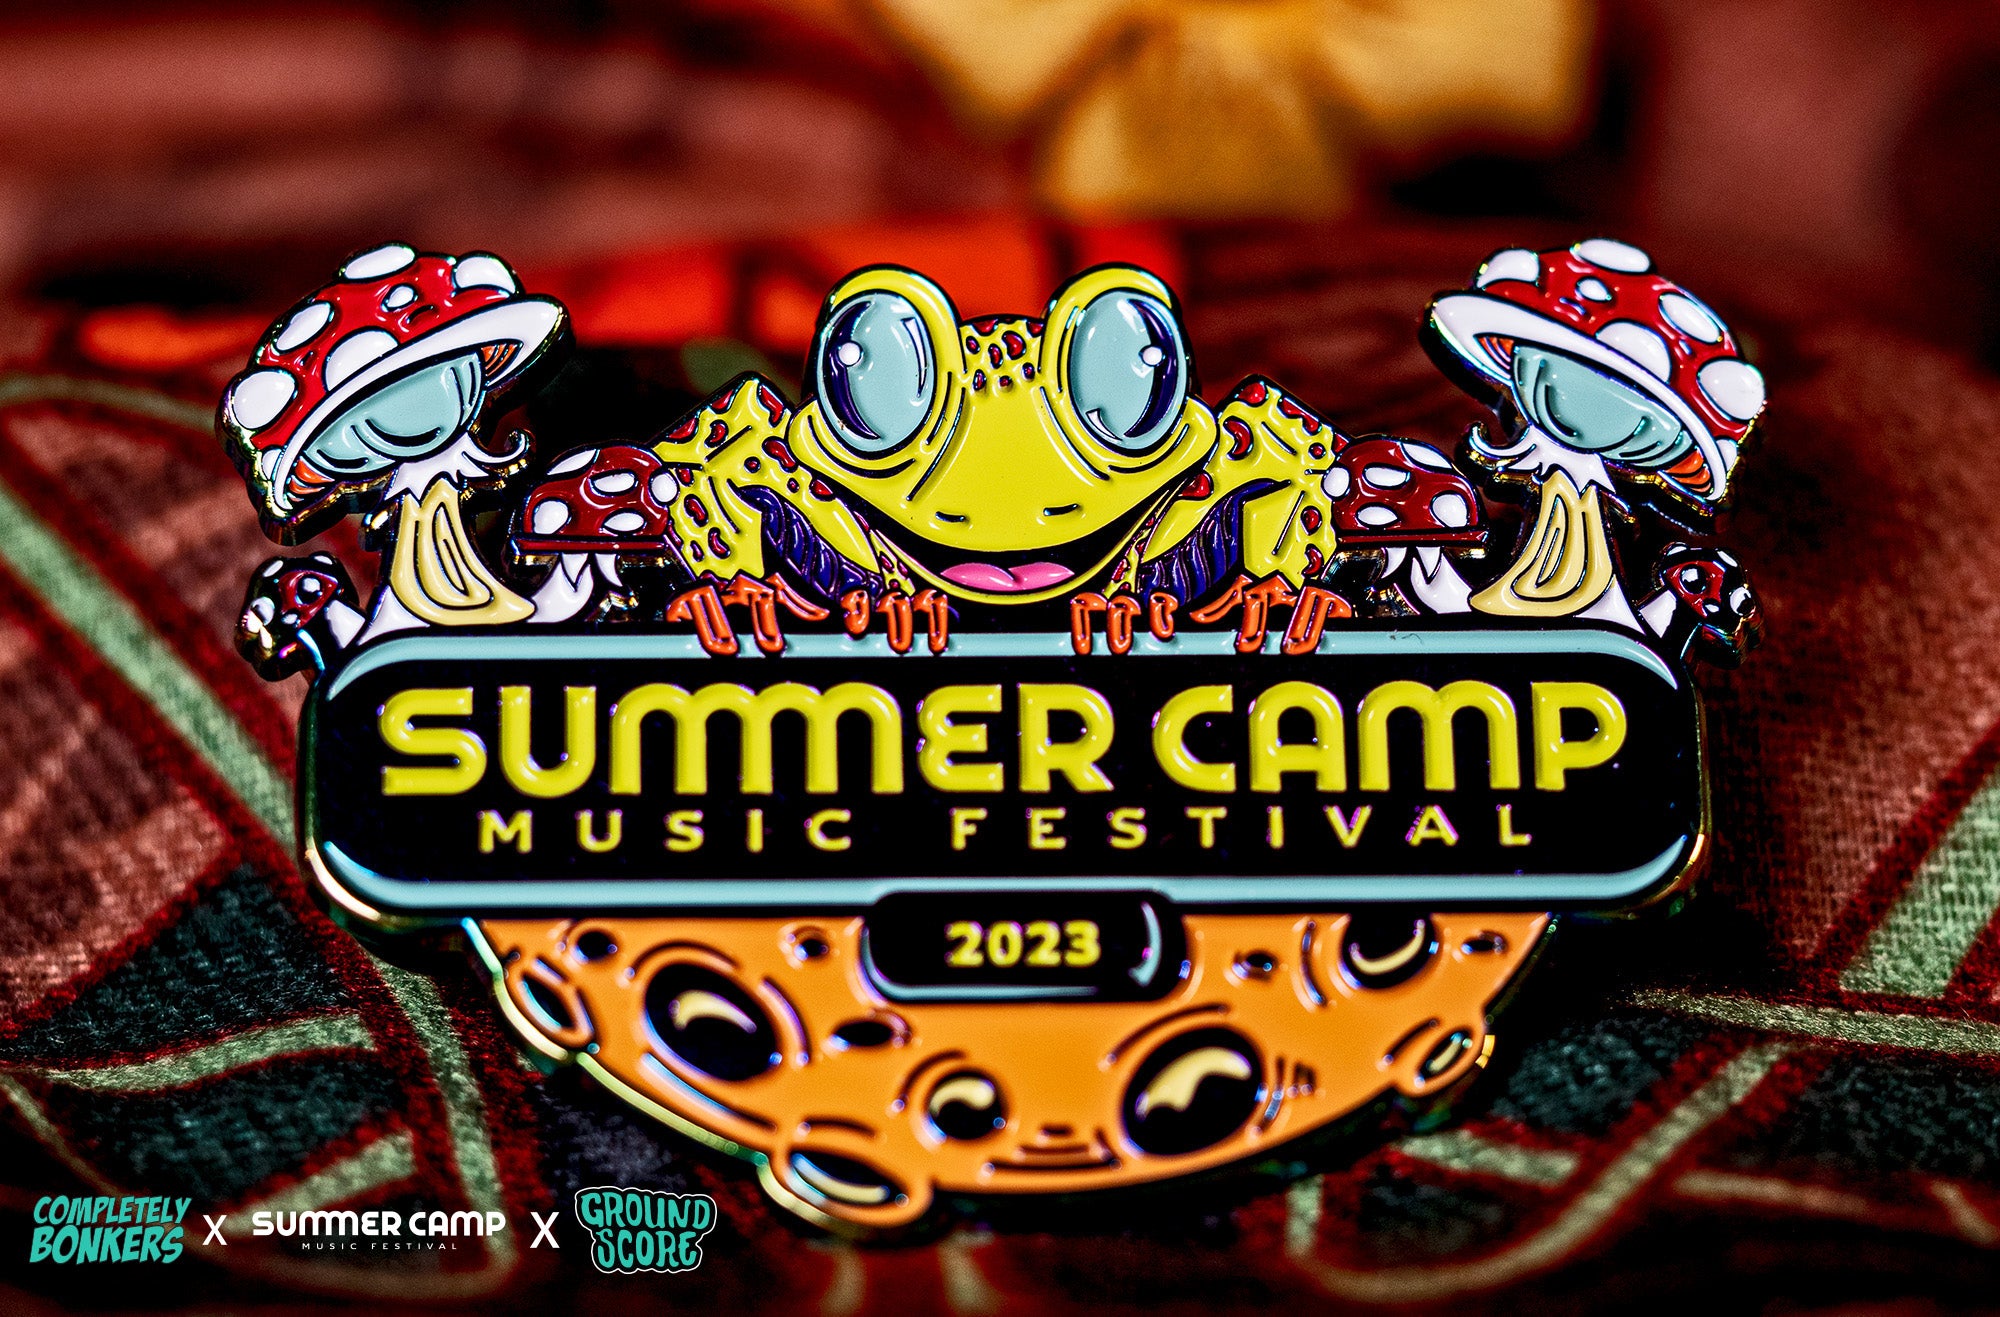 Completely Bonkers - Official 2023 Summer Camp Frog Pin (LE 175)